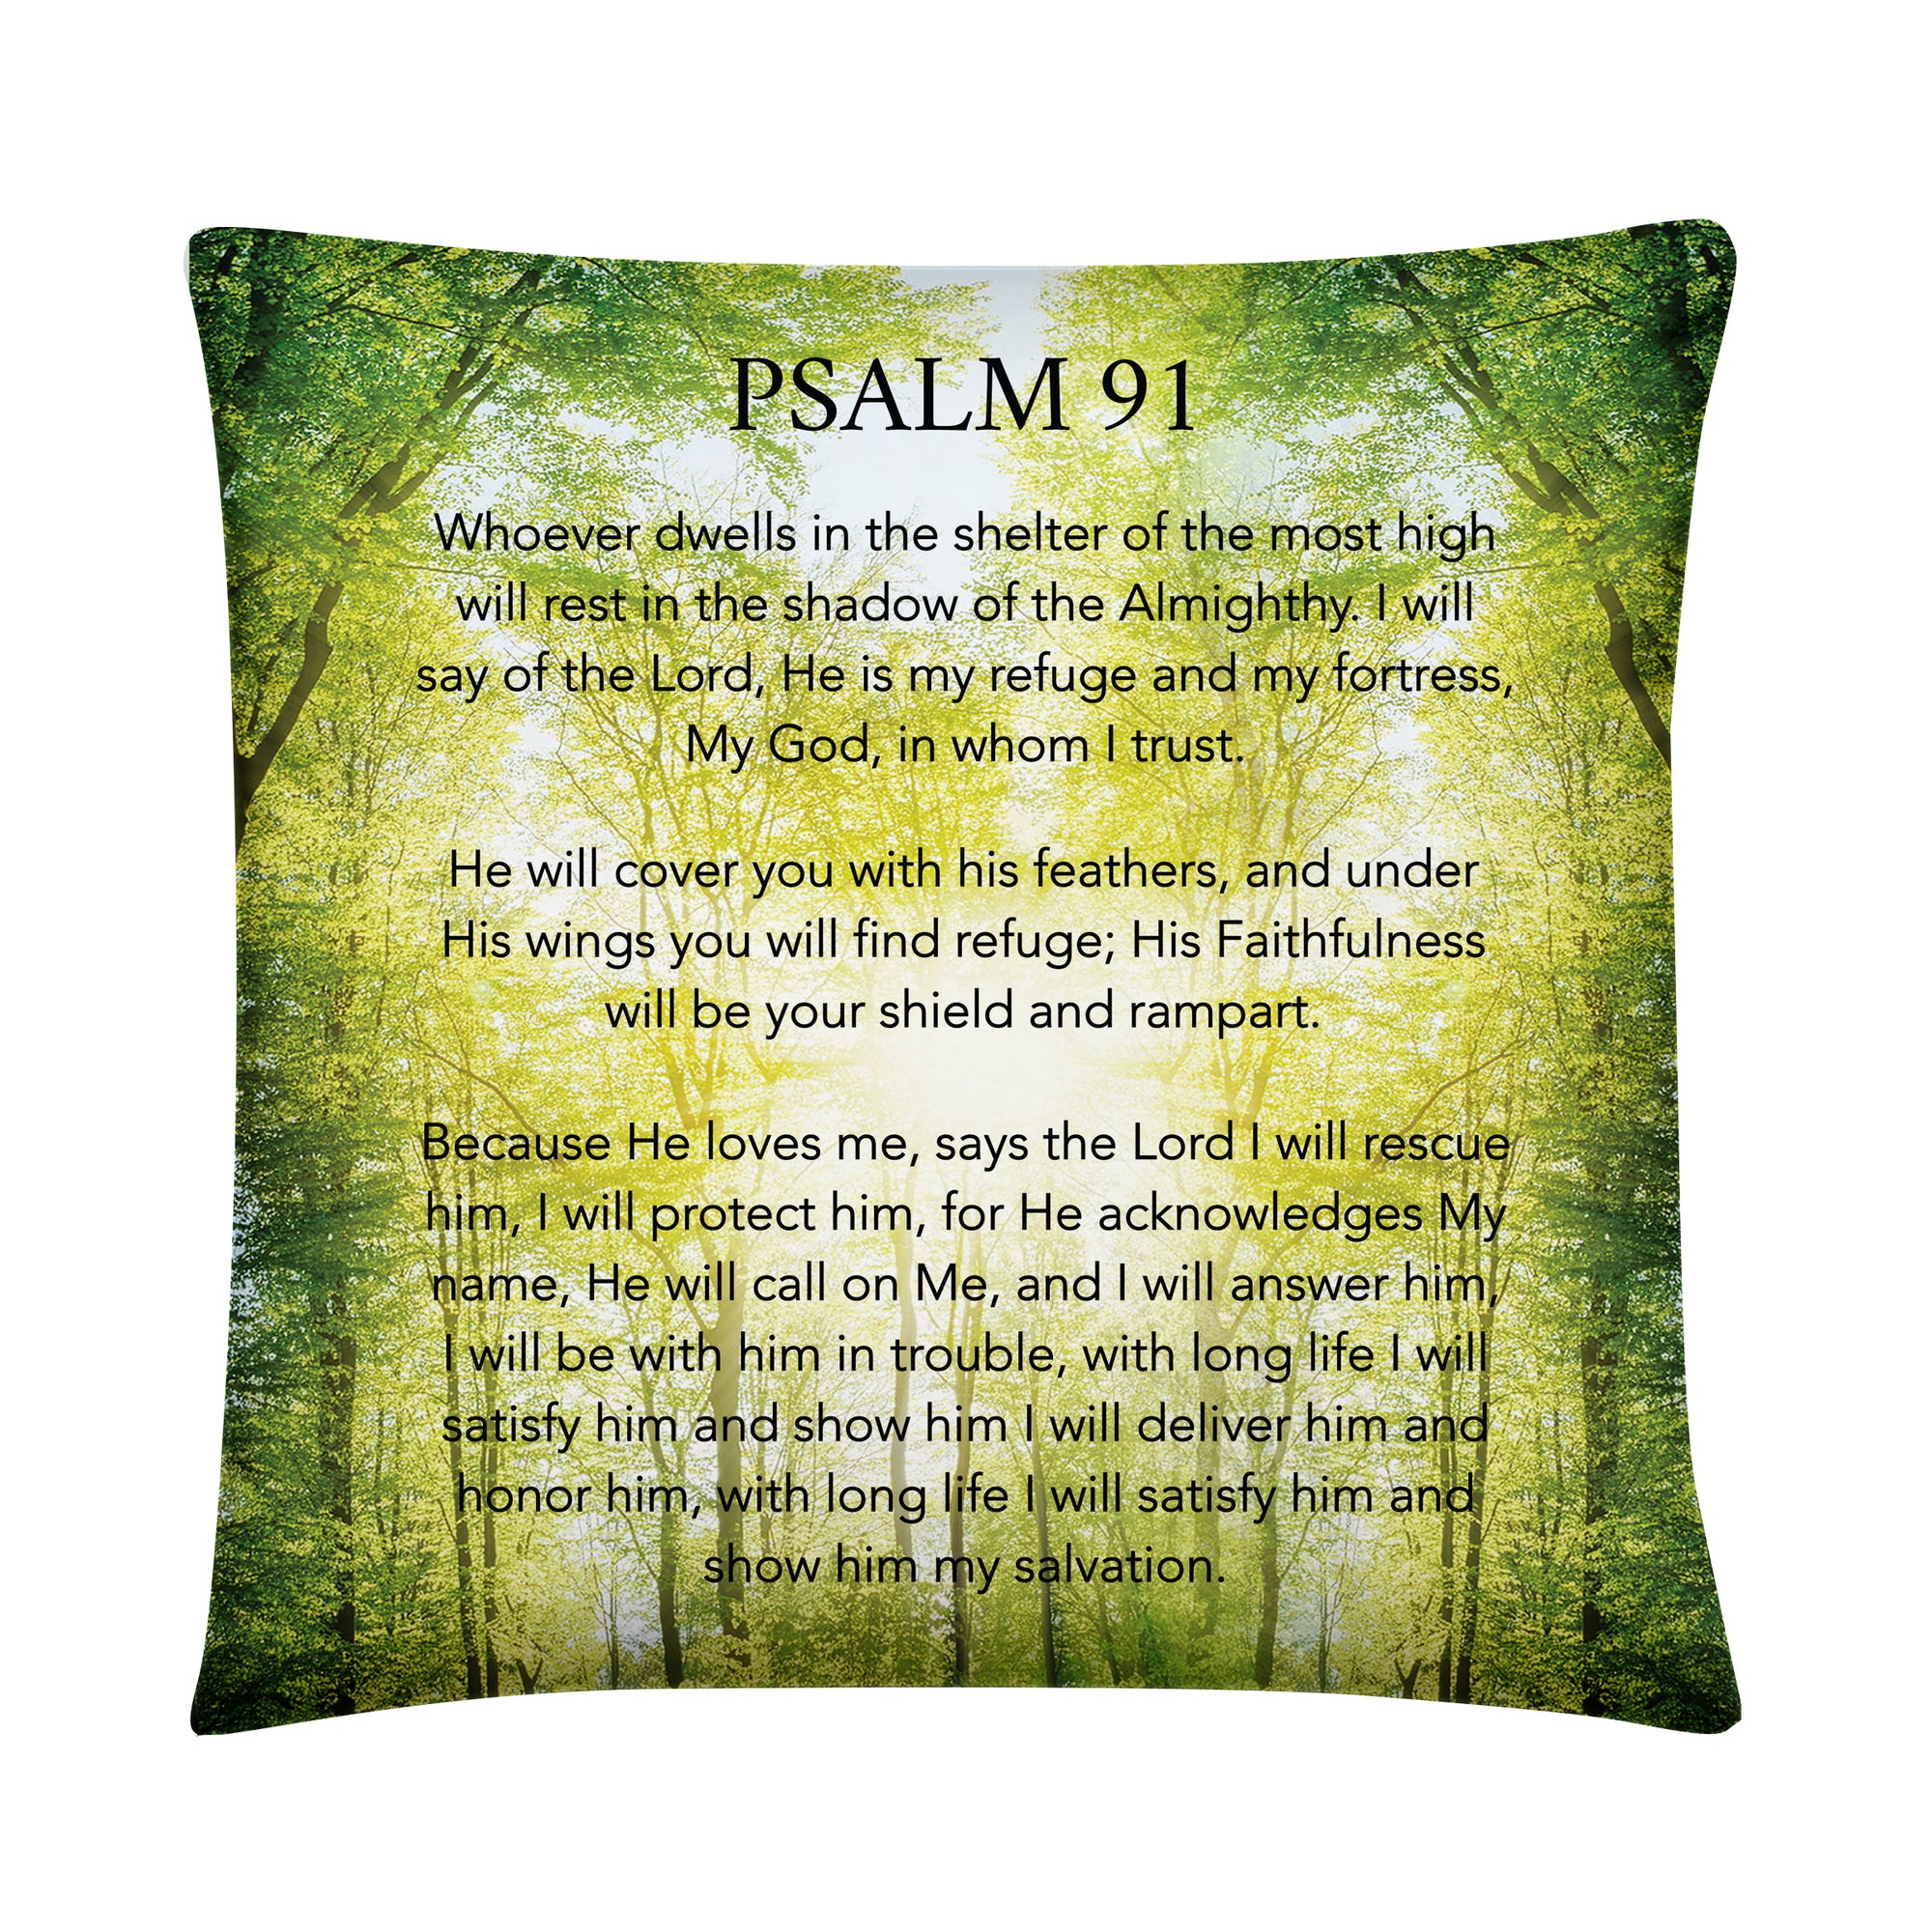 A beautiful bereavement pillow, designed for both comfort and remembrance, it's an ideal memorial home decor piece.